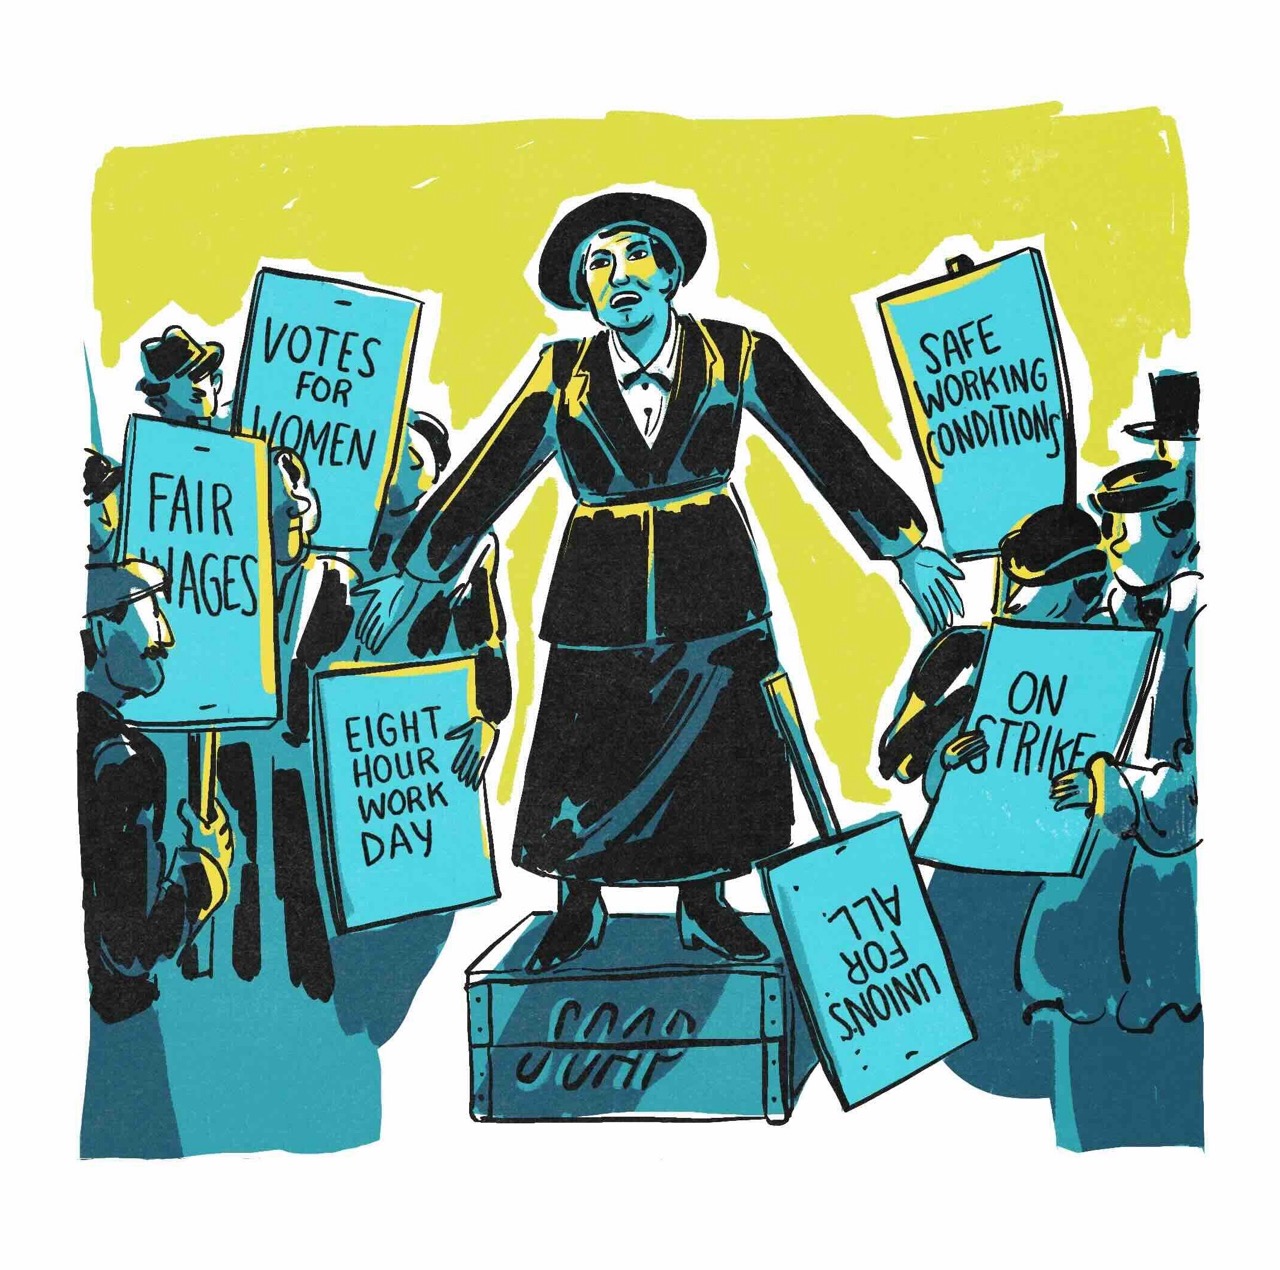 Drawing of Marie Equie orating on a soapbox surrounded by people holding signs with slogans including "votes for women," and "eight hour work day."